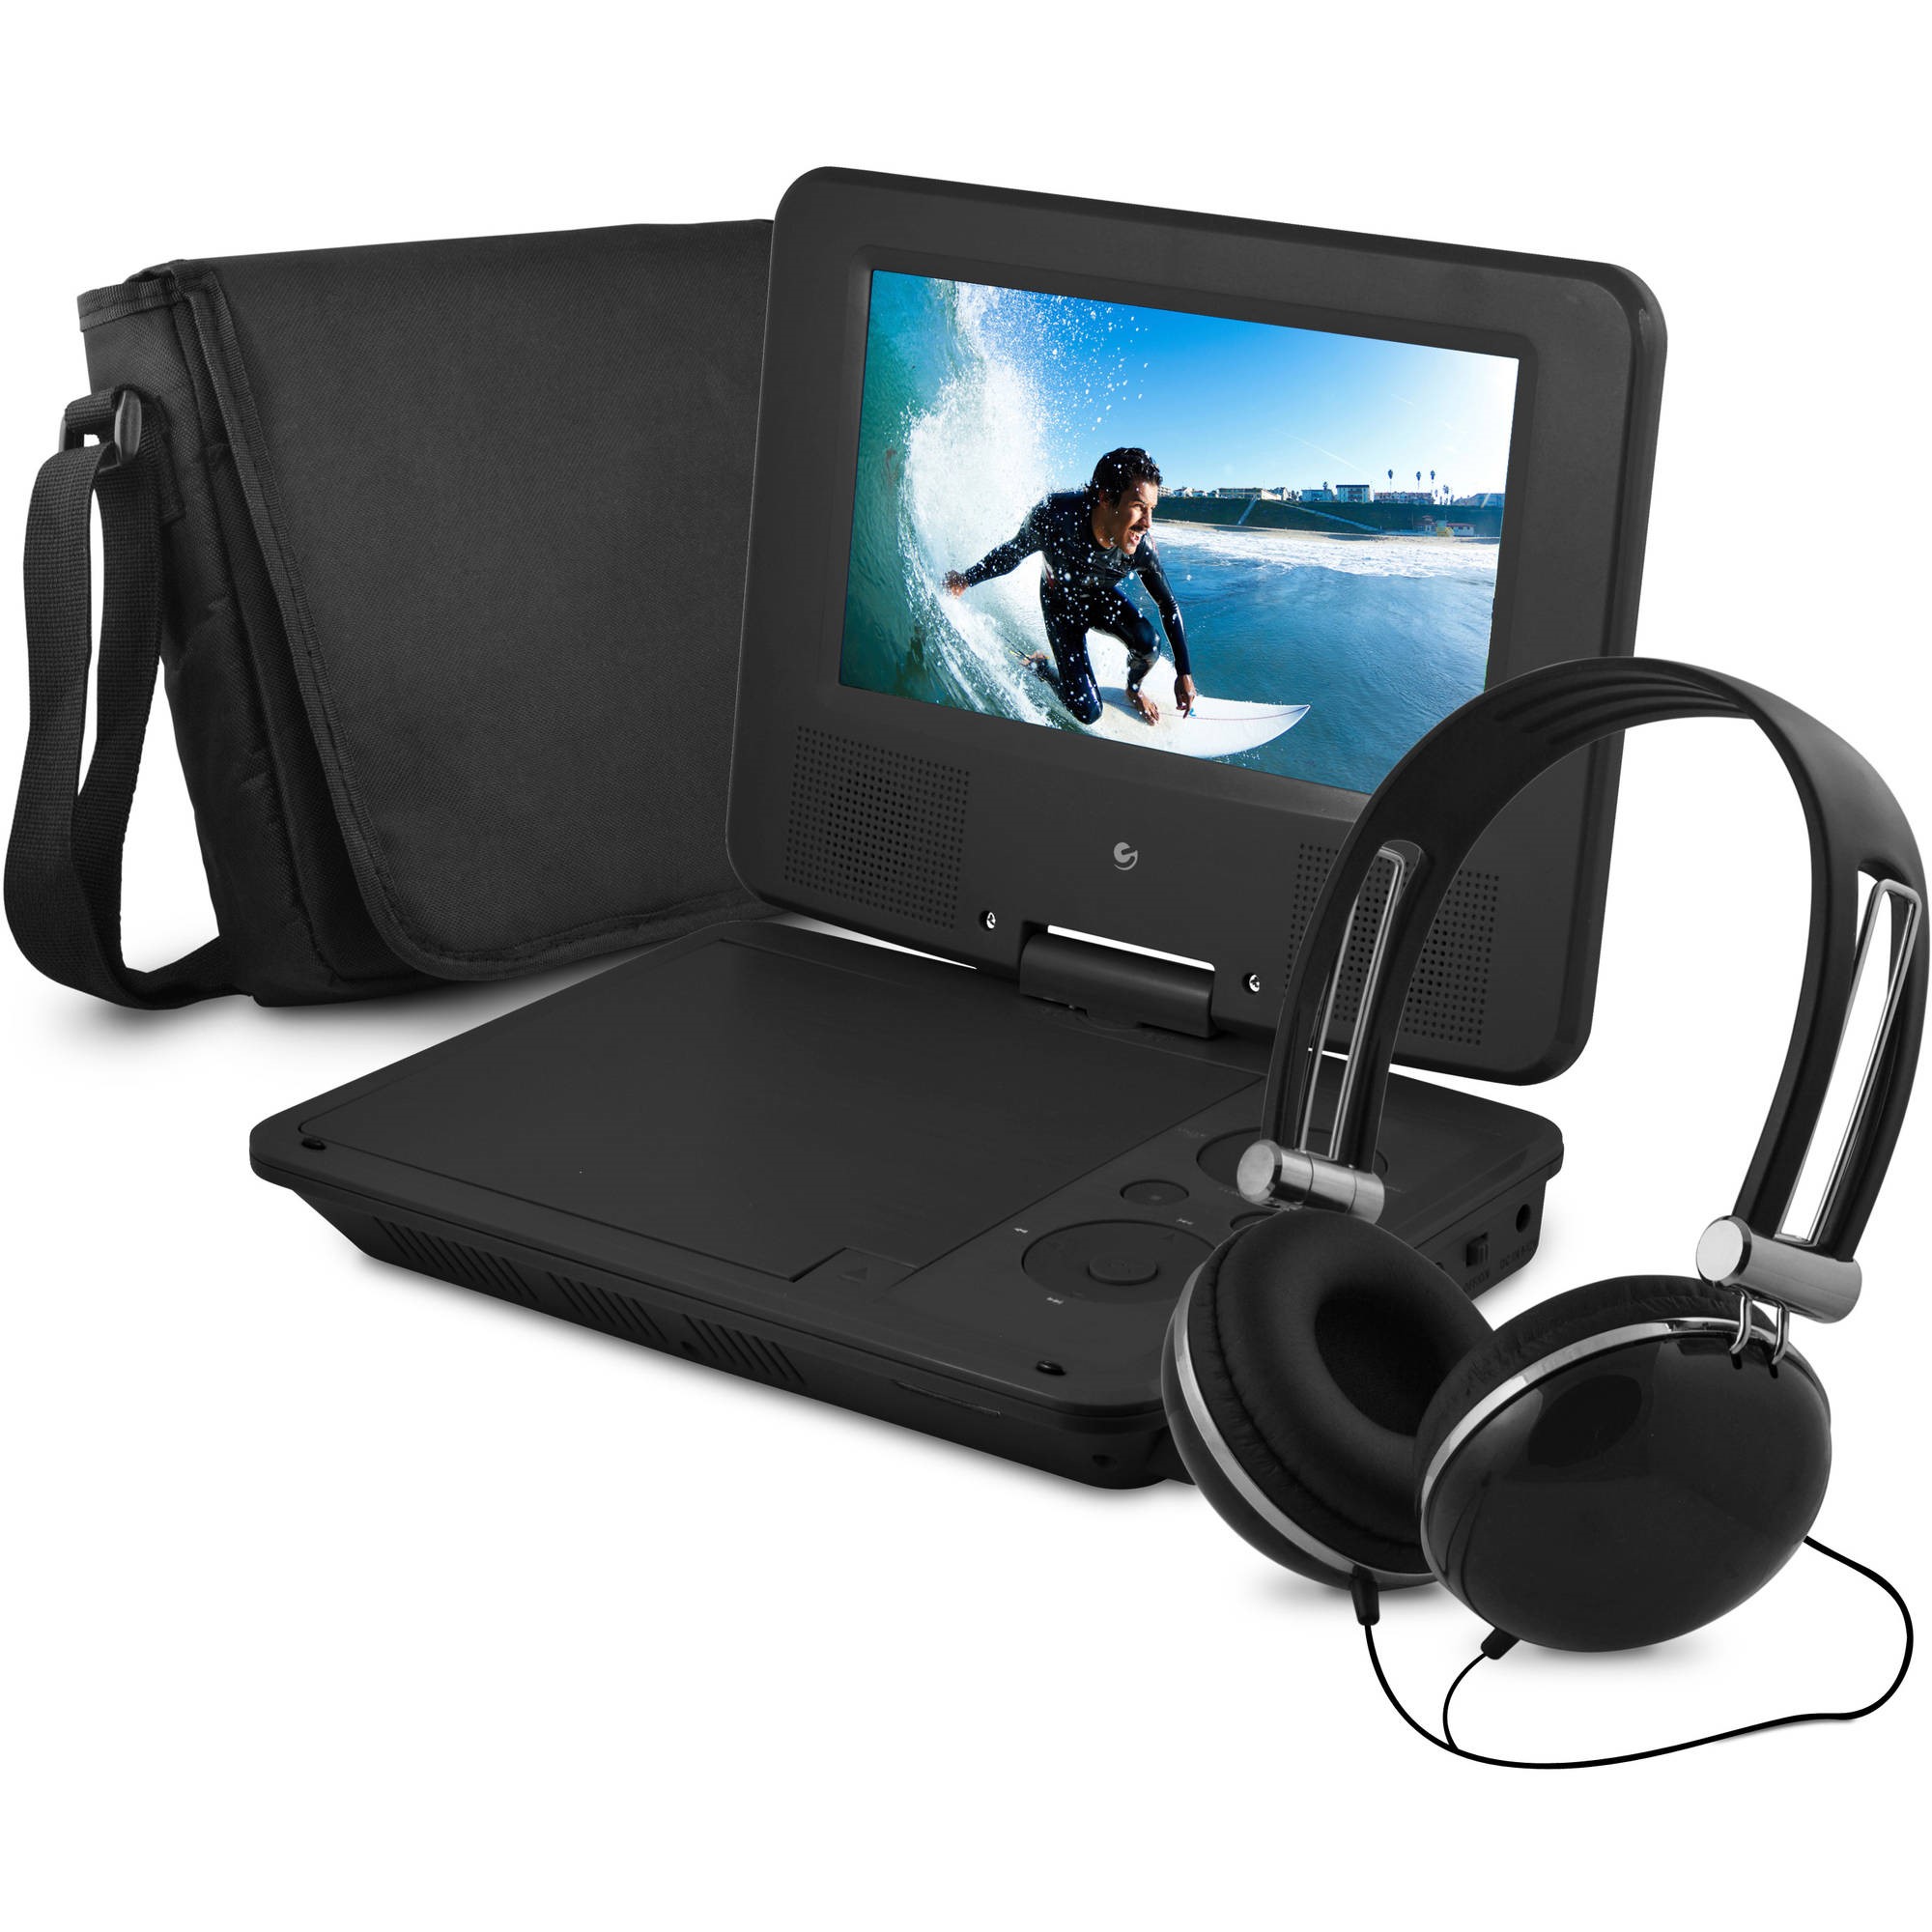 Ematic 7" Portable DVD Player with Matching Headphones and Bag - EPD707bl - image 1 of 8